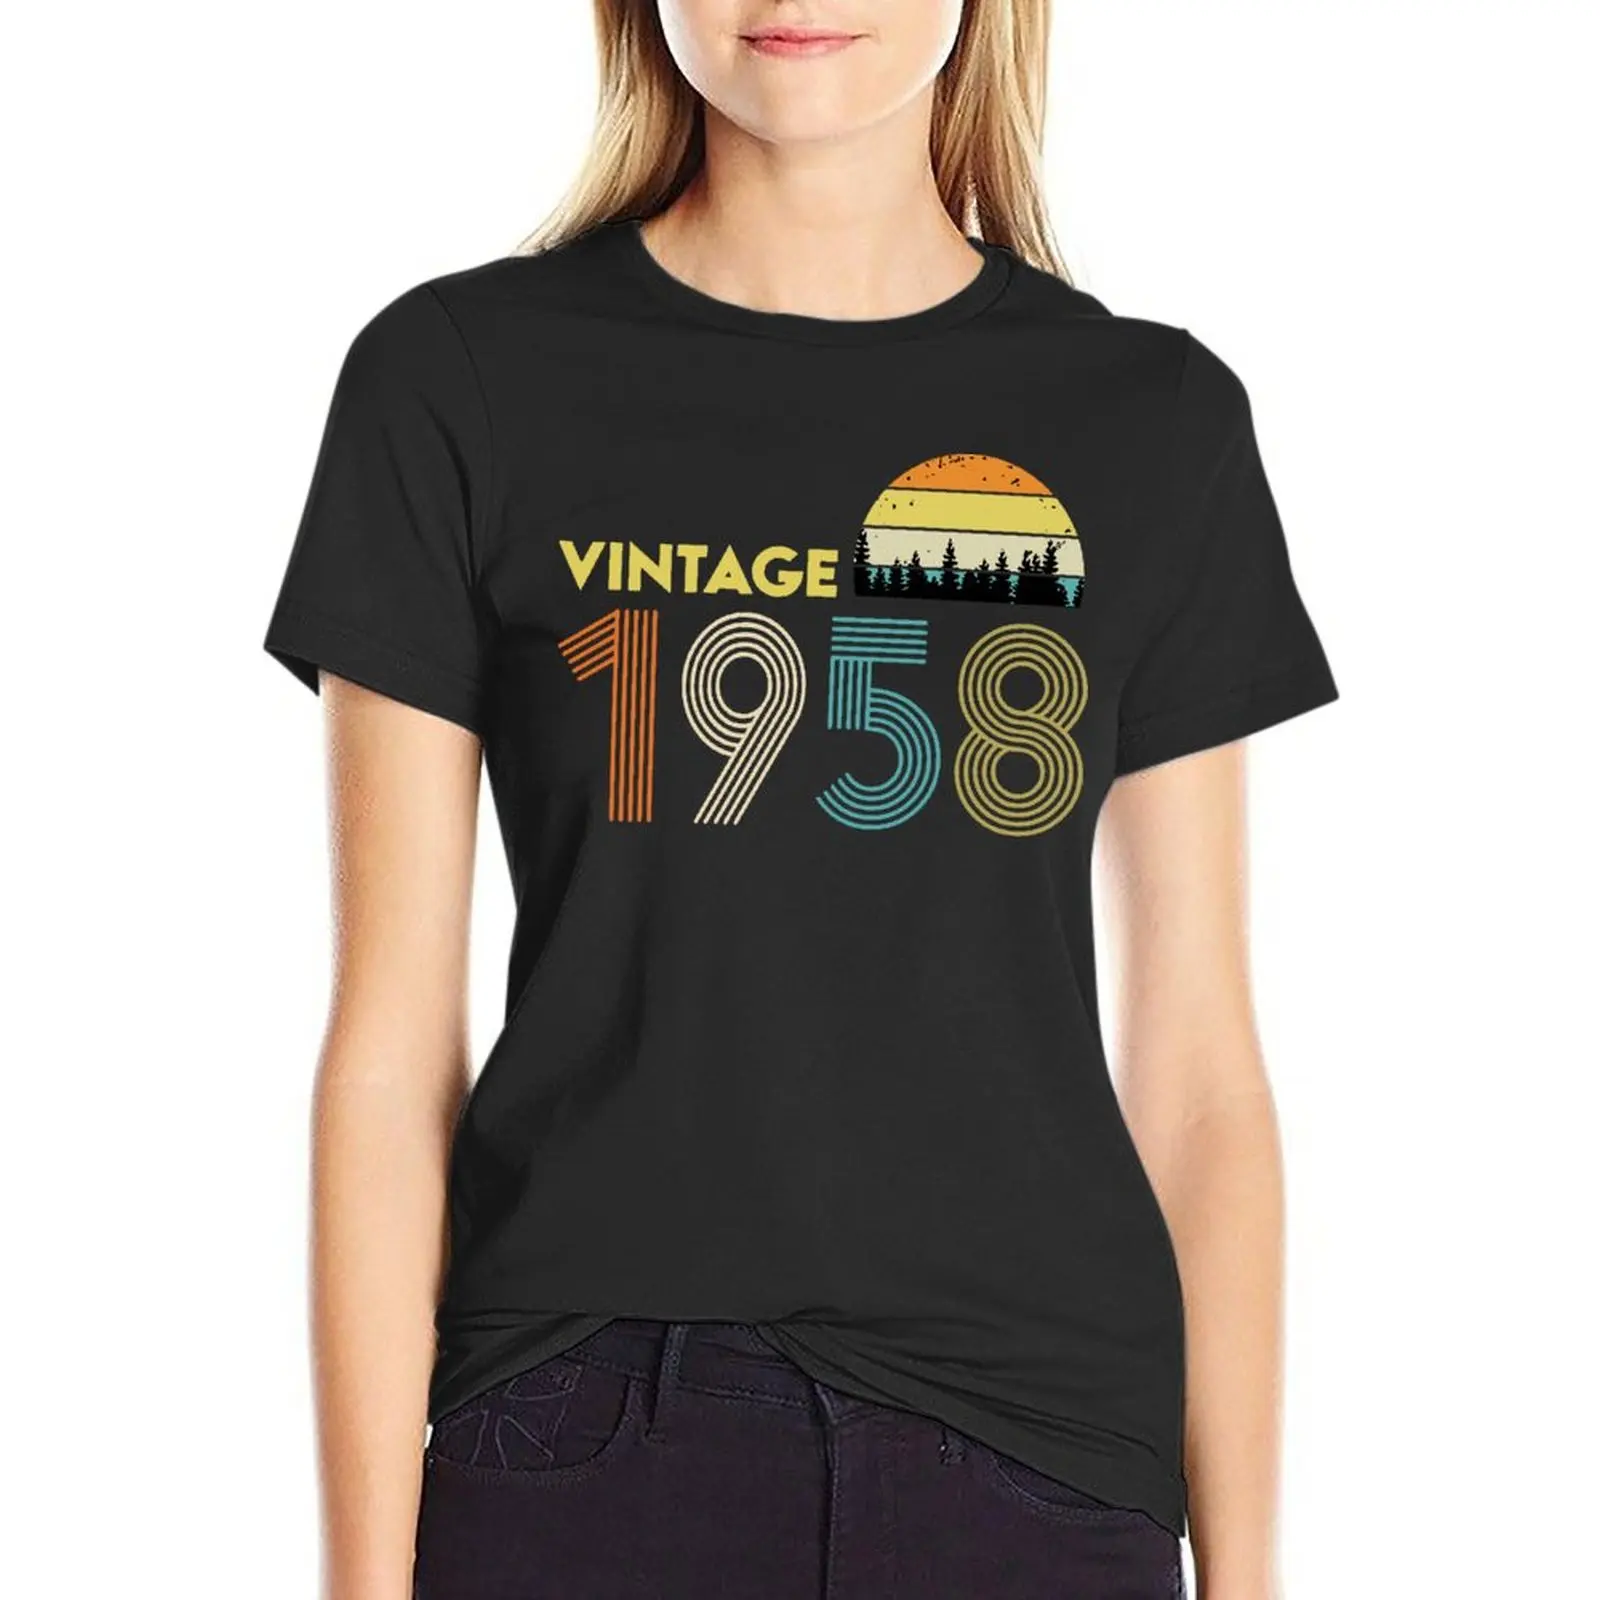 Vintage 1958 Gift Father'S Day Oversize T Shirts Branded Women'S Clothing Short Sleeve Streetwear Big Size Tops Tee